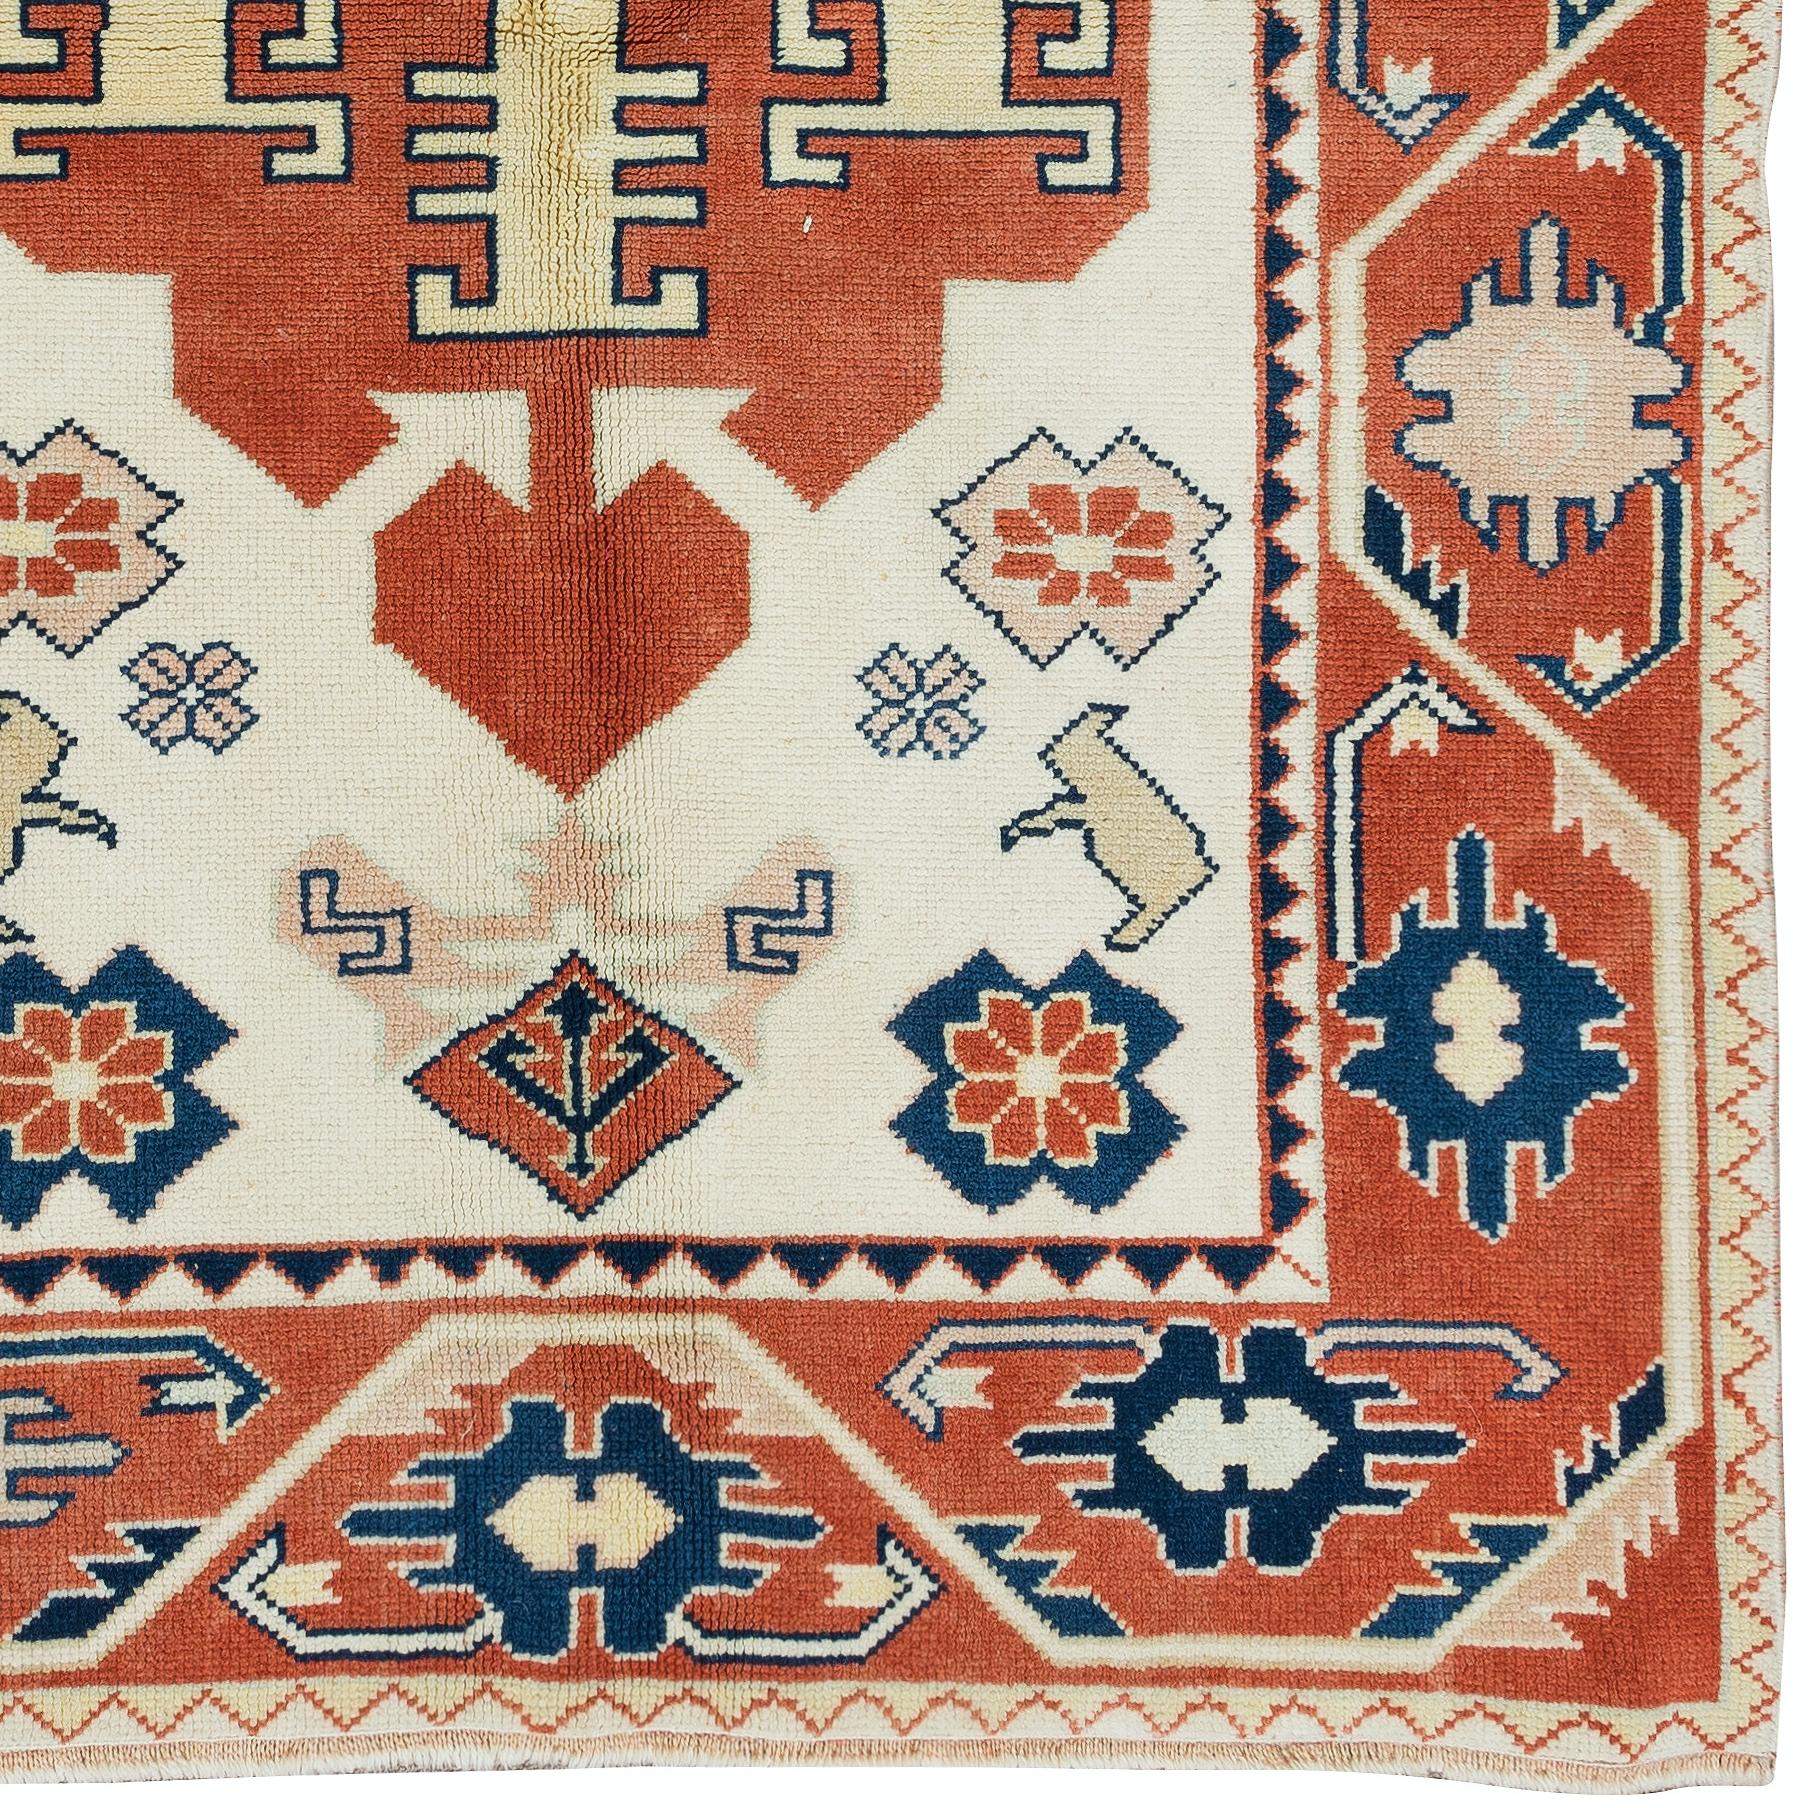 4x5.6 Ft Vintage Handmade Geometric Turkish Rug in Cream, Red and Blue Colors In Good Condition For Sale In Philadelphia, PA